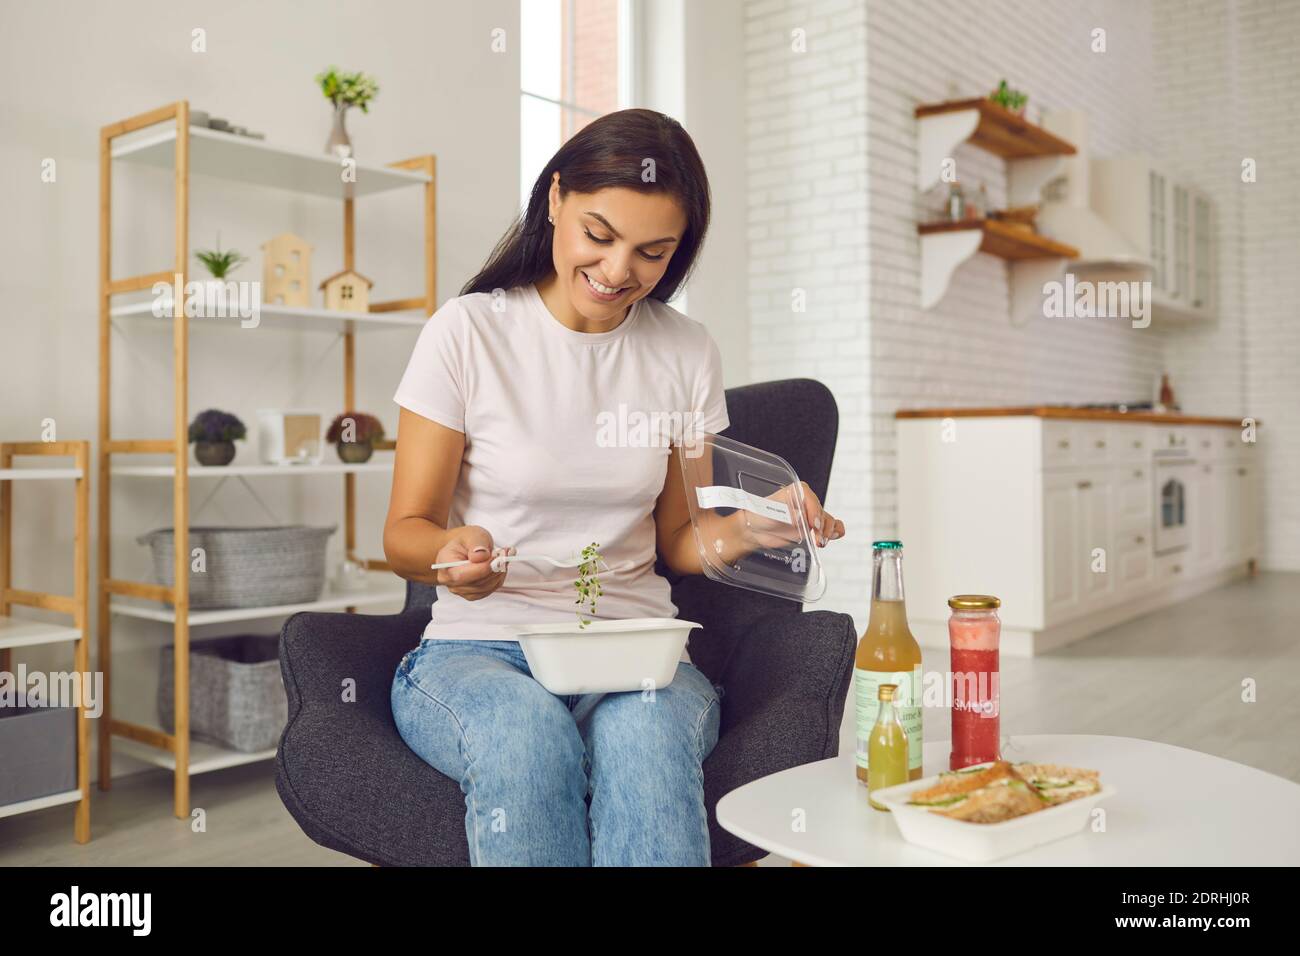 Happy young woman having fresh healthy takeaway lunch sitting in an armchair at home Stock Photo